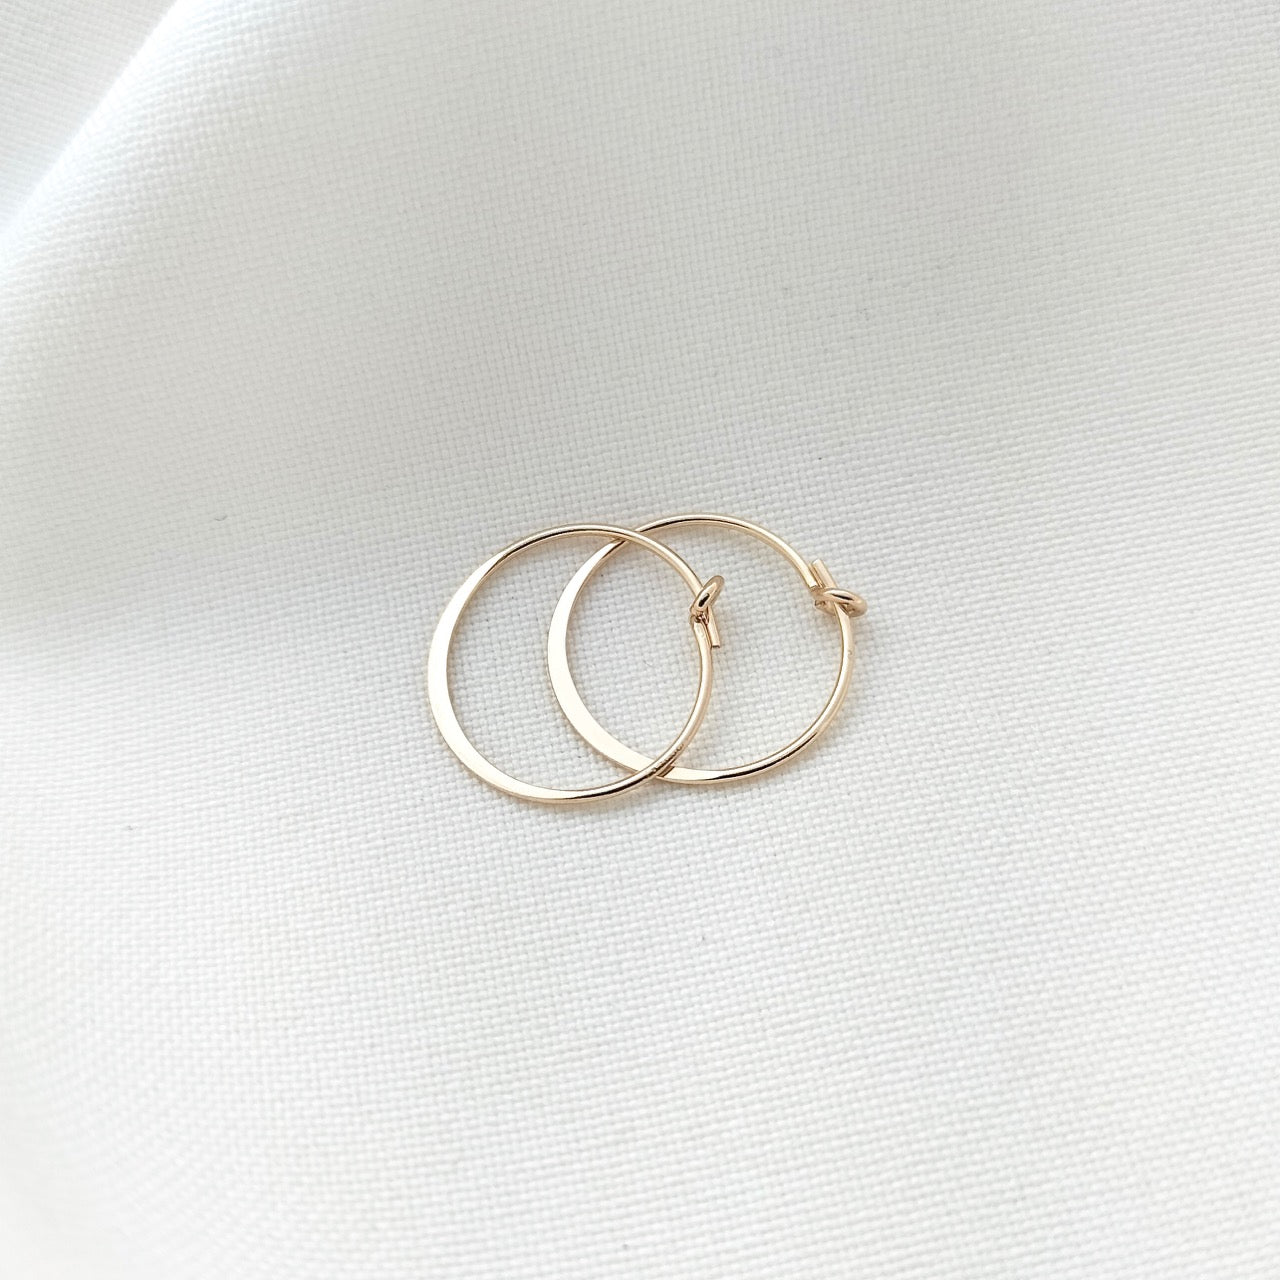 Small slim gold hoops